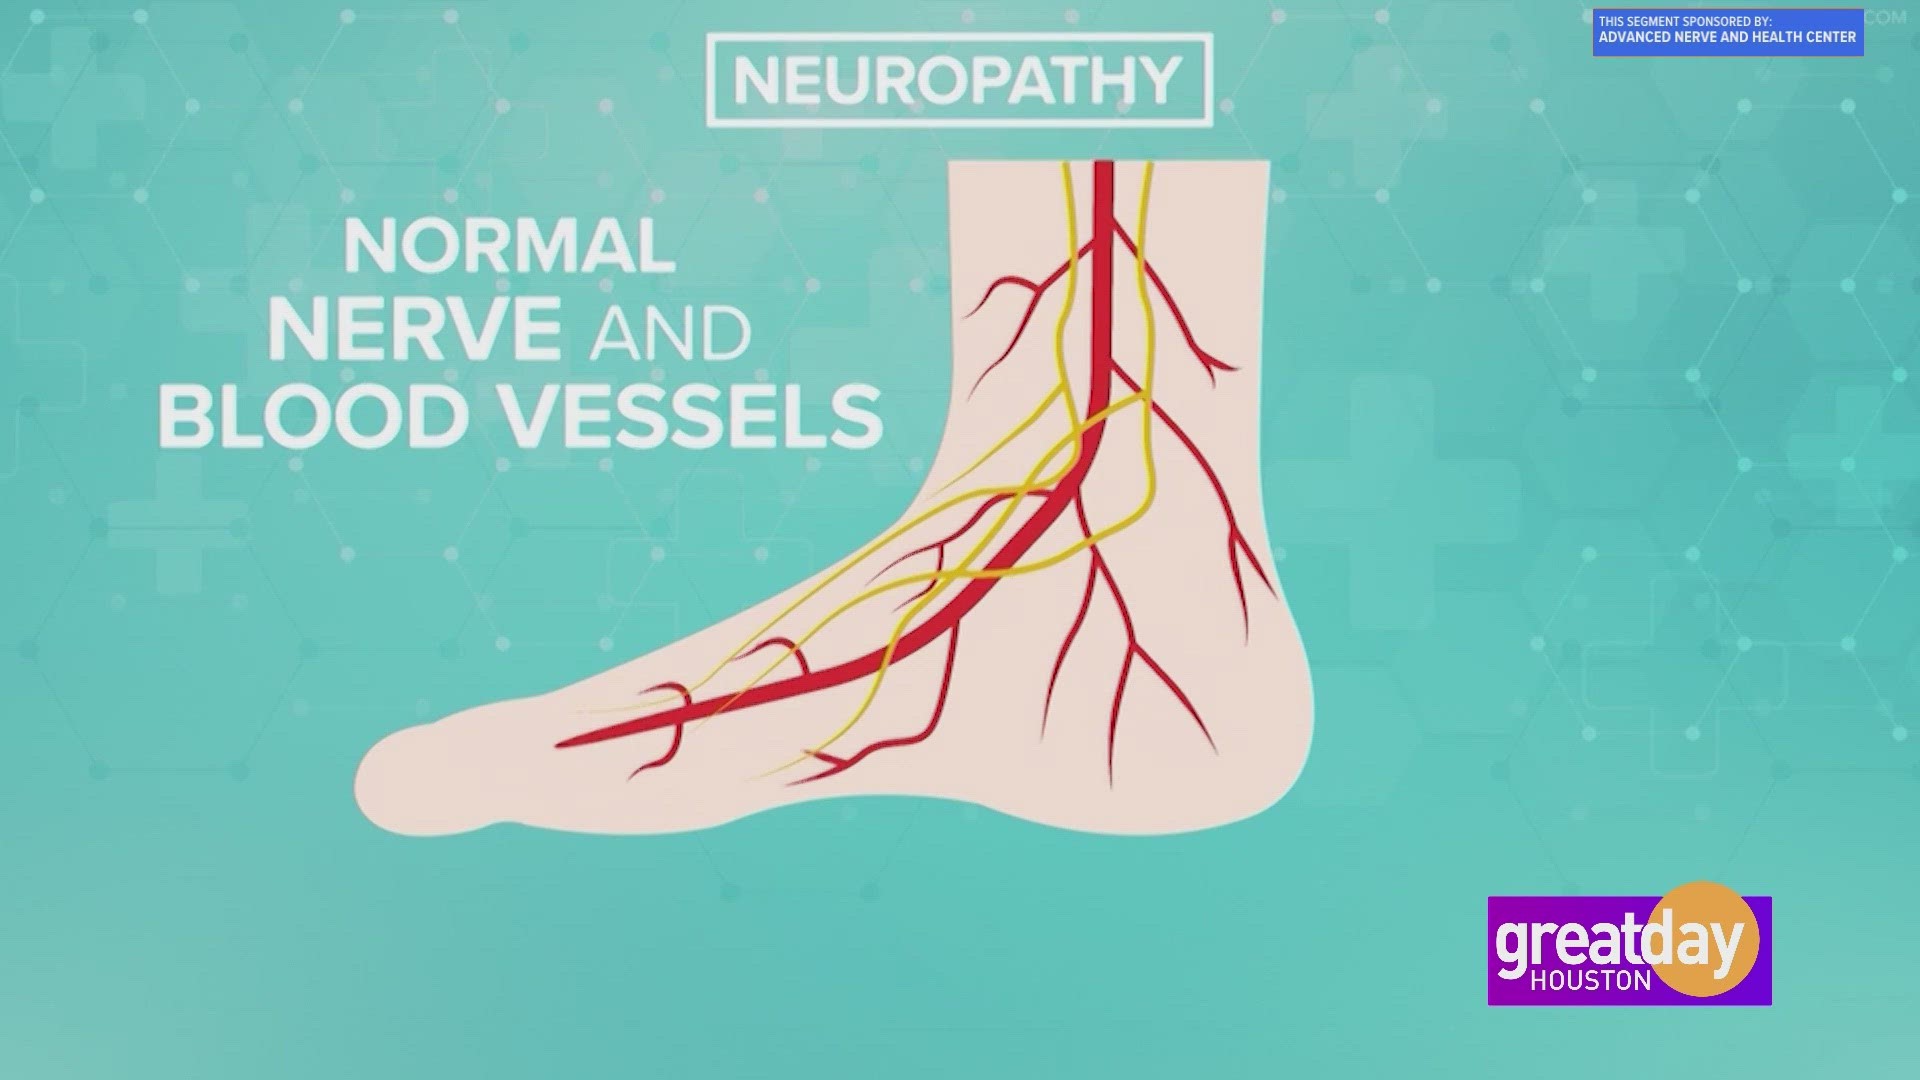 Stop the debilitating symptoms of neuropathy. Make a change today with help from Advanced Nerve and Health Center.